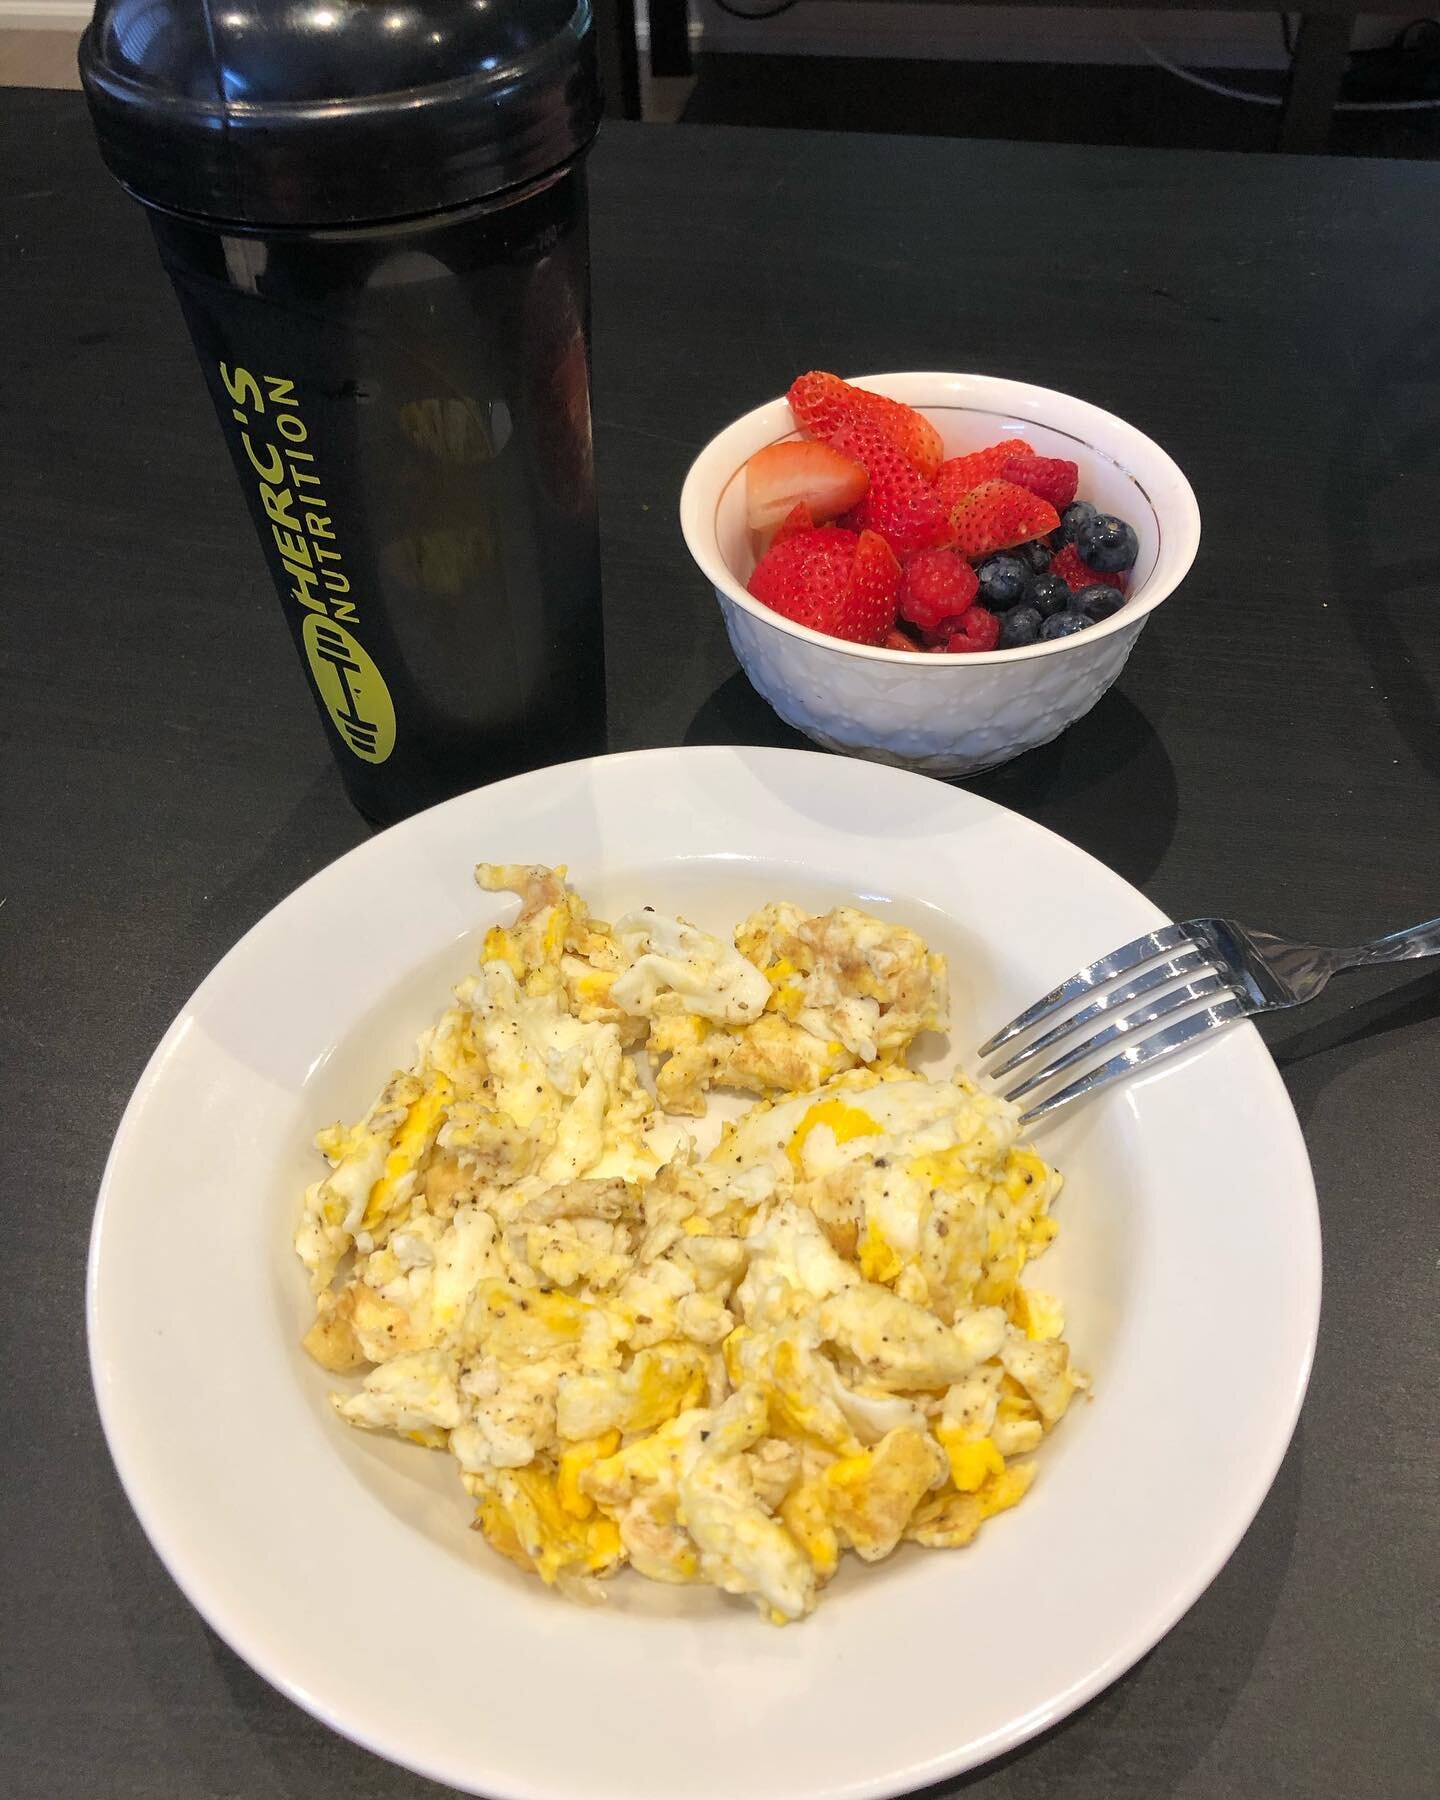 Simple and fast. Some scrambled eggs (4 whites + 2 whole eggs) with berries and BCAAs. Good macro spread, clean healthy fuel for the day. Most of the time this is my weekend breakfast. During the week it&rsquo;s an even faster variation of this usual